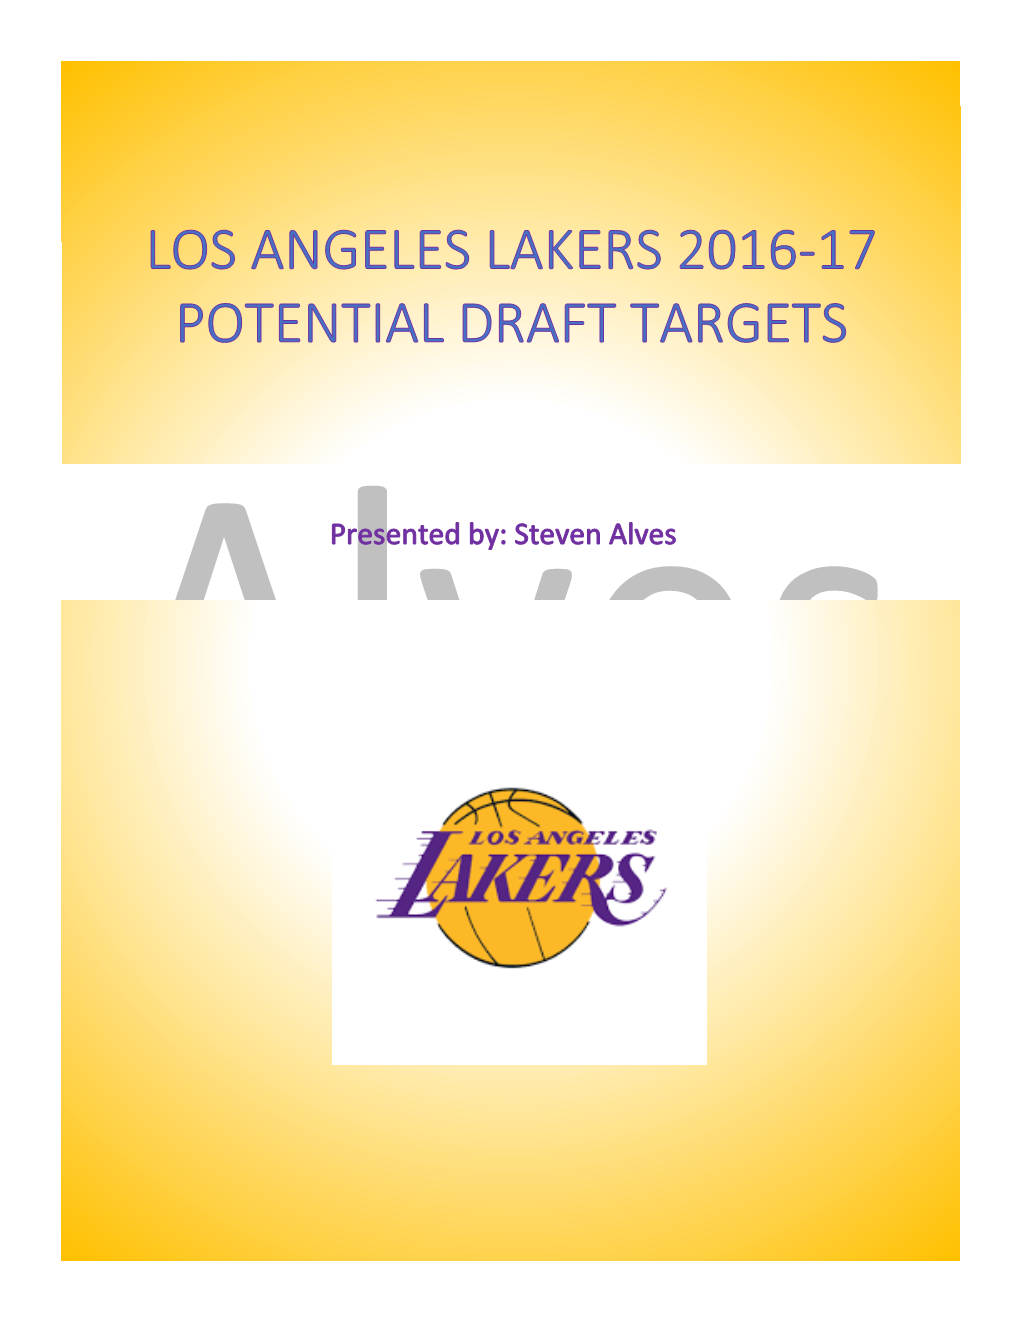 Los Angeles Lakers 2016-17 Potential Draft Targets